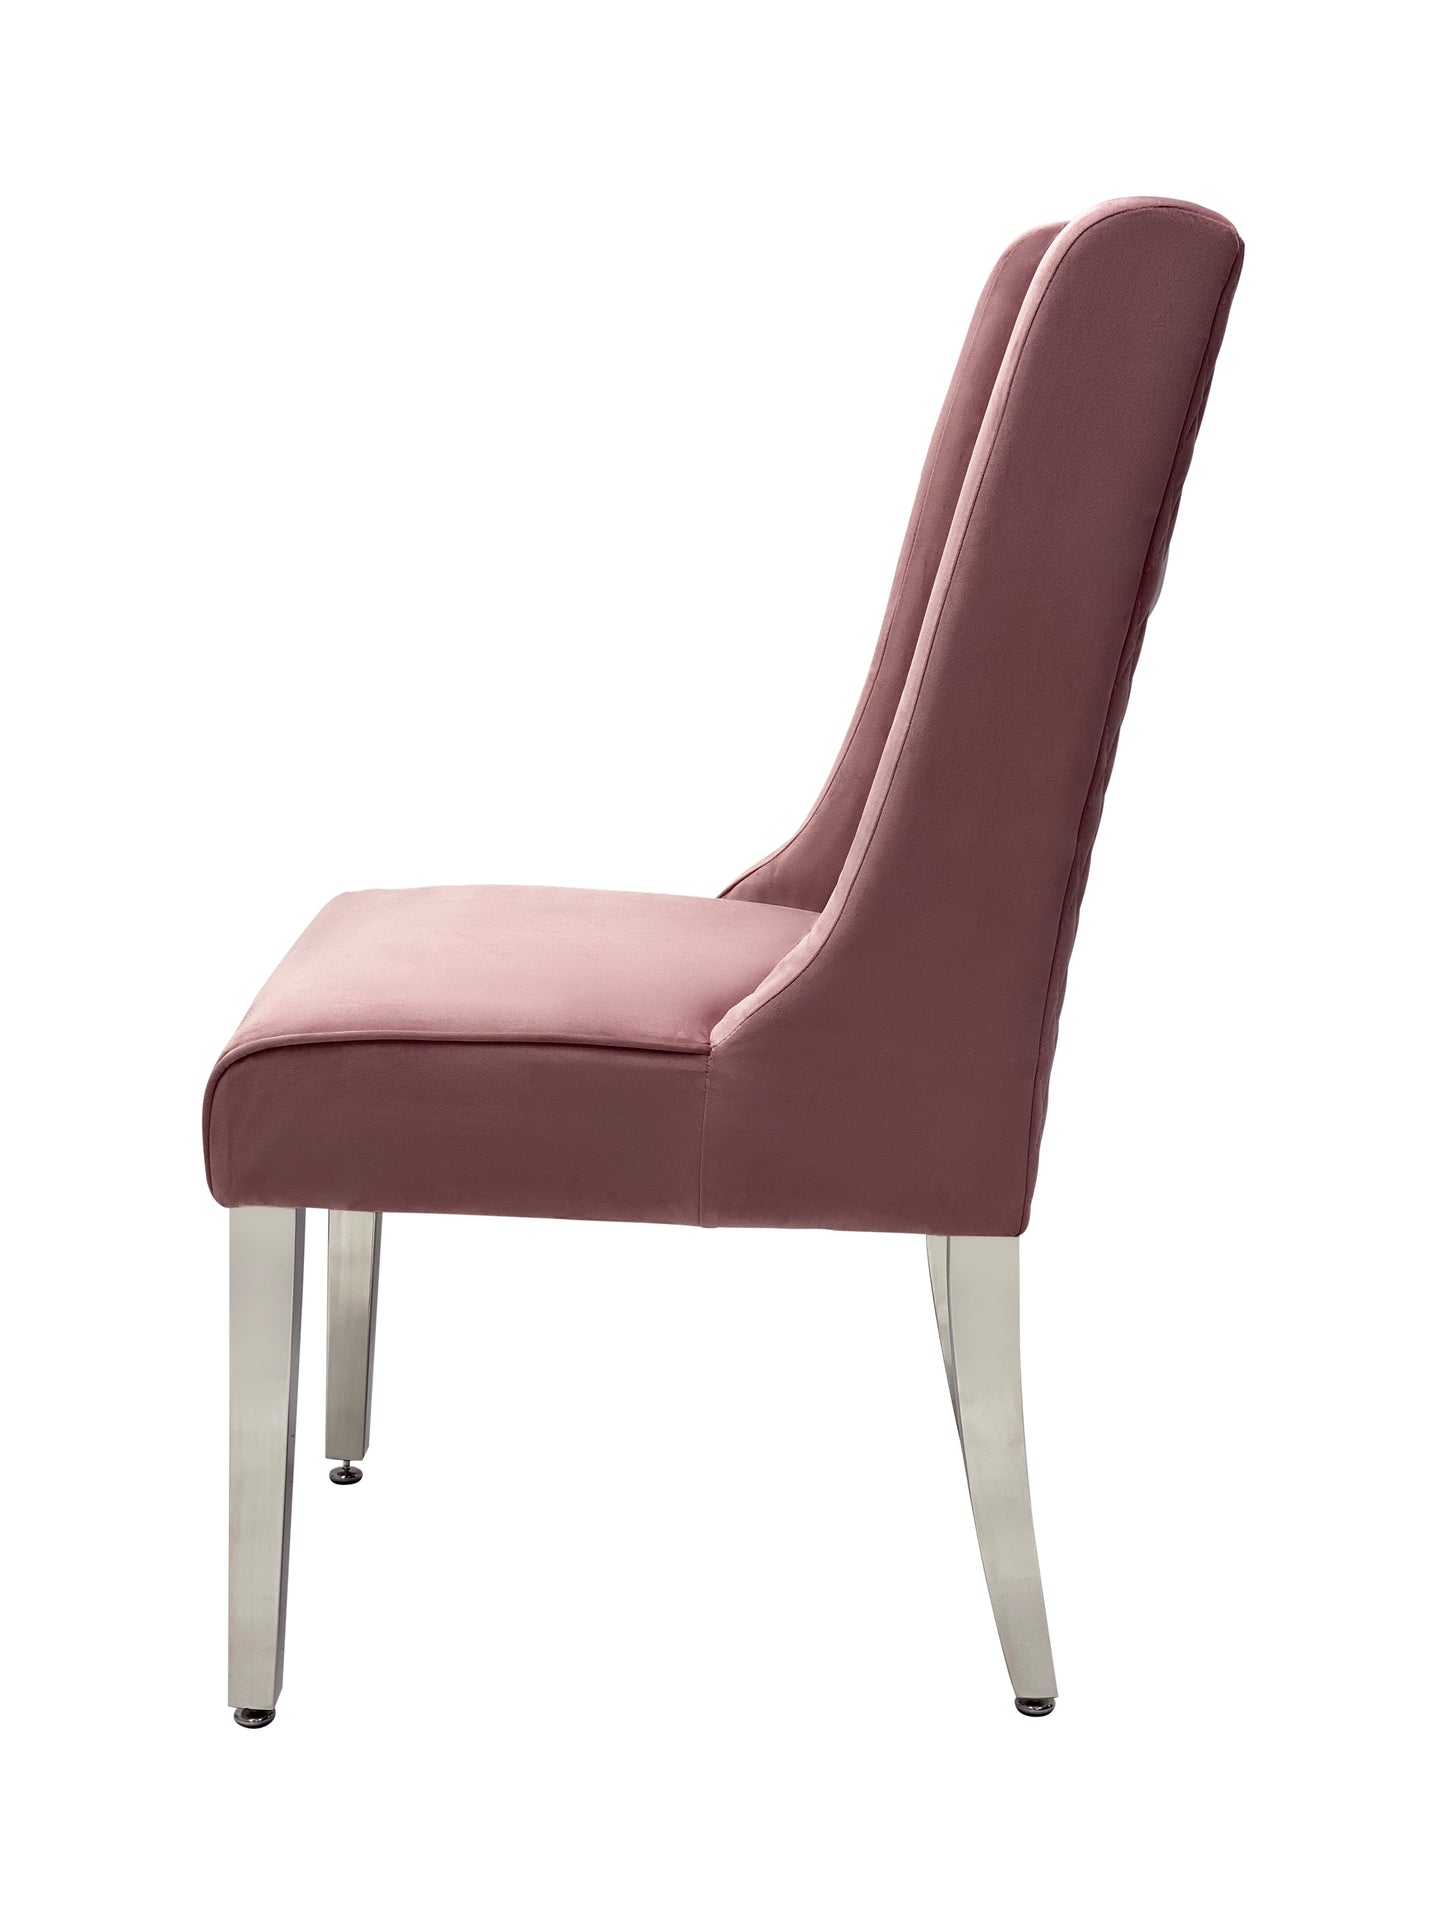 Kyoto Dining Chair Velvet Fabric Tufted Front Pink Color with Chrome Legs (Set of 2)